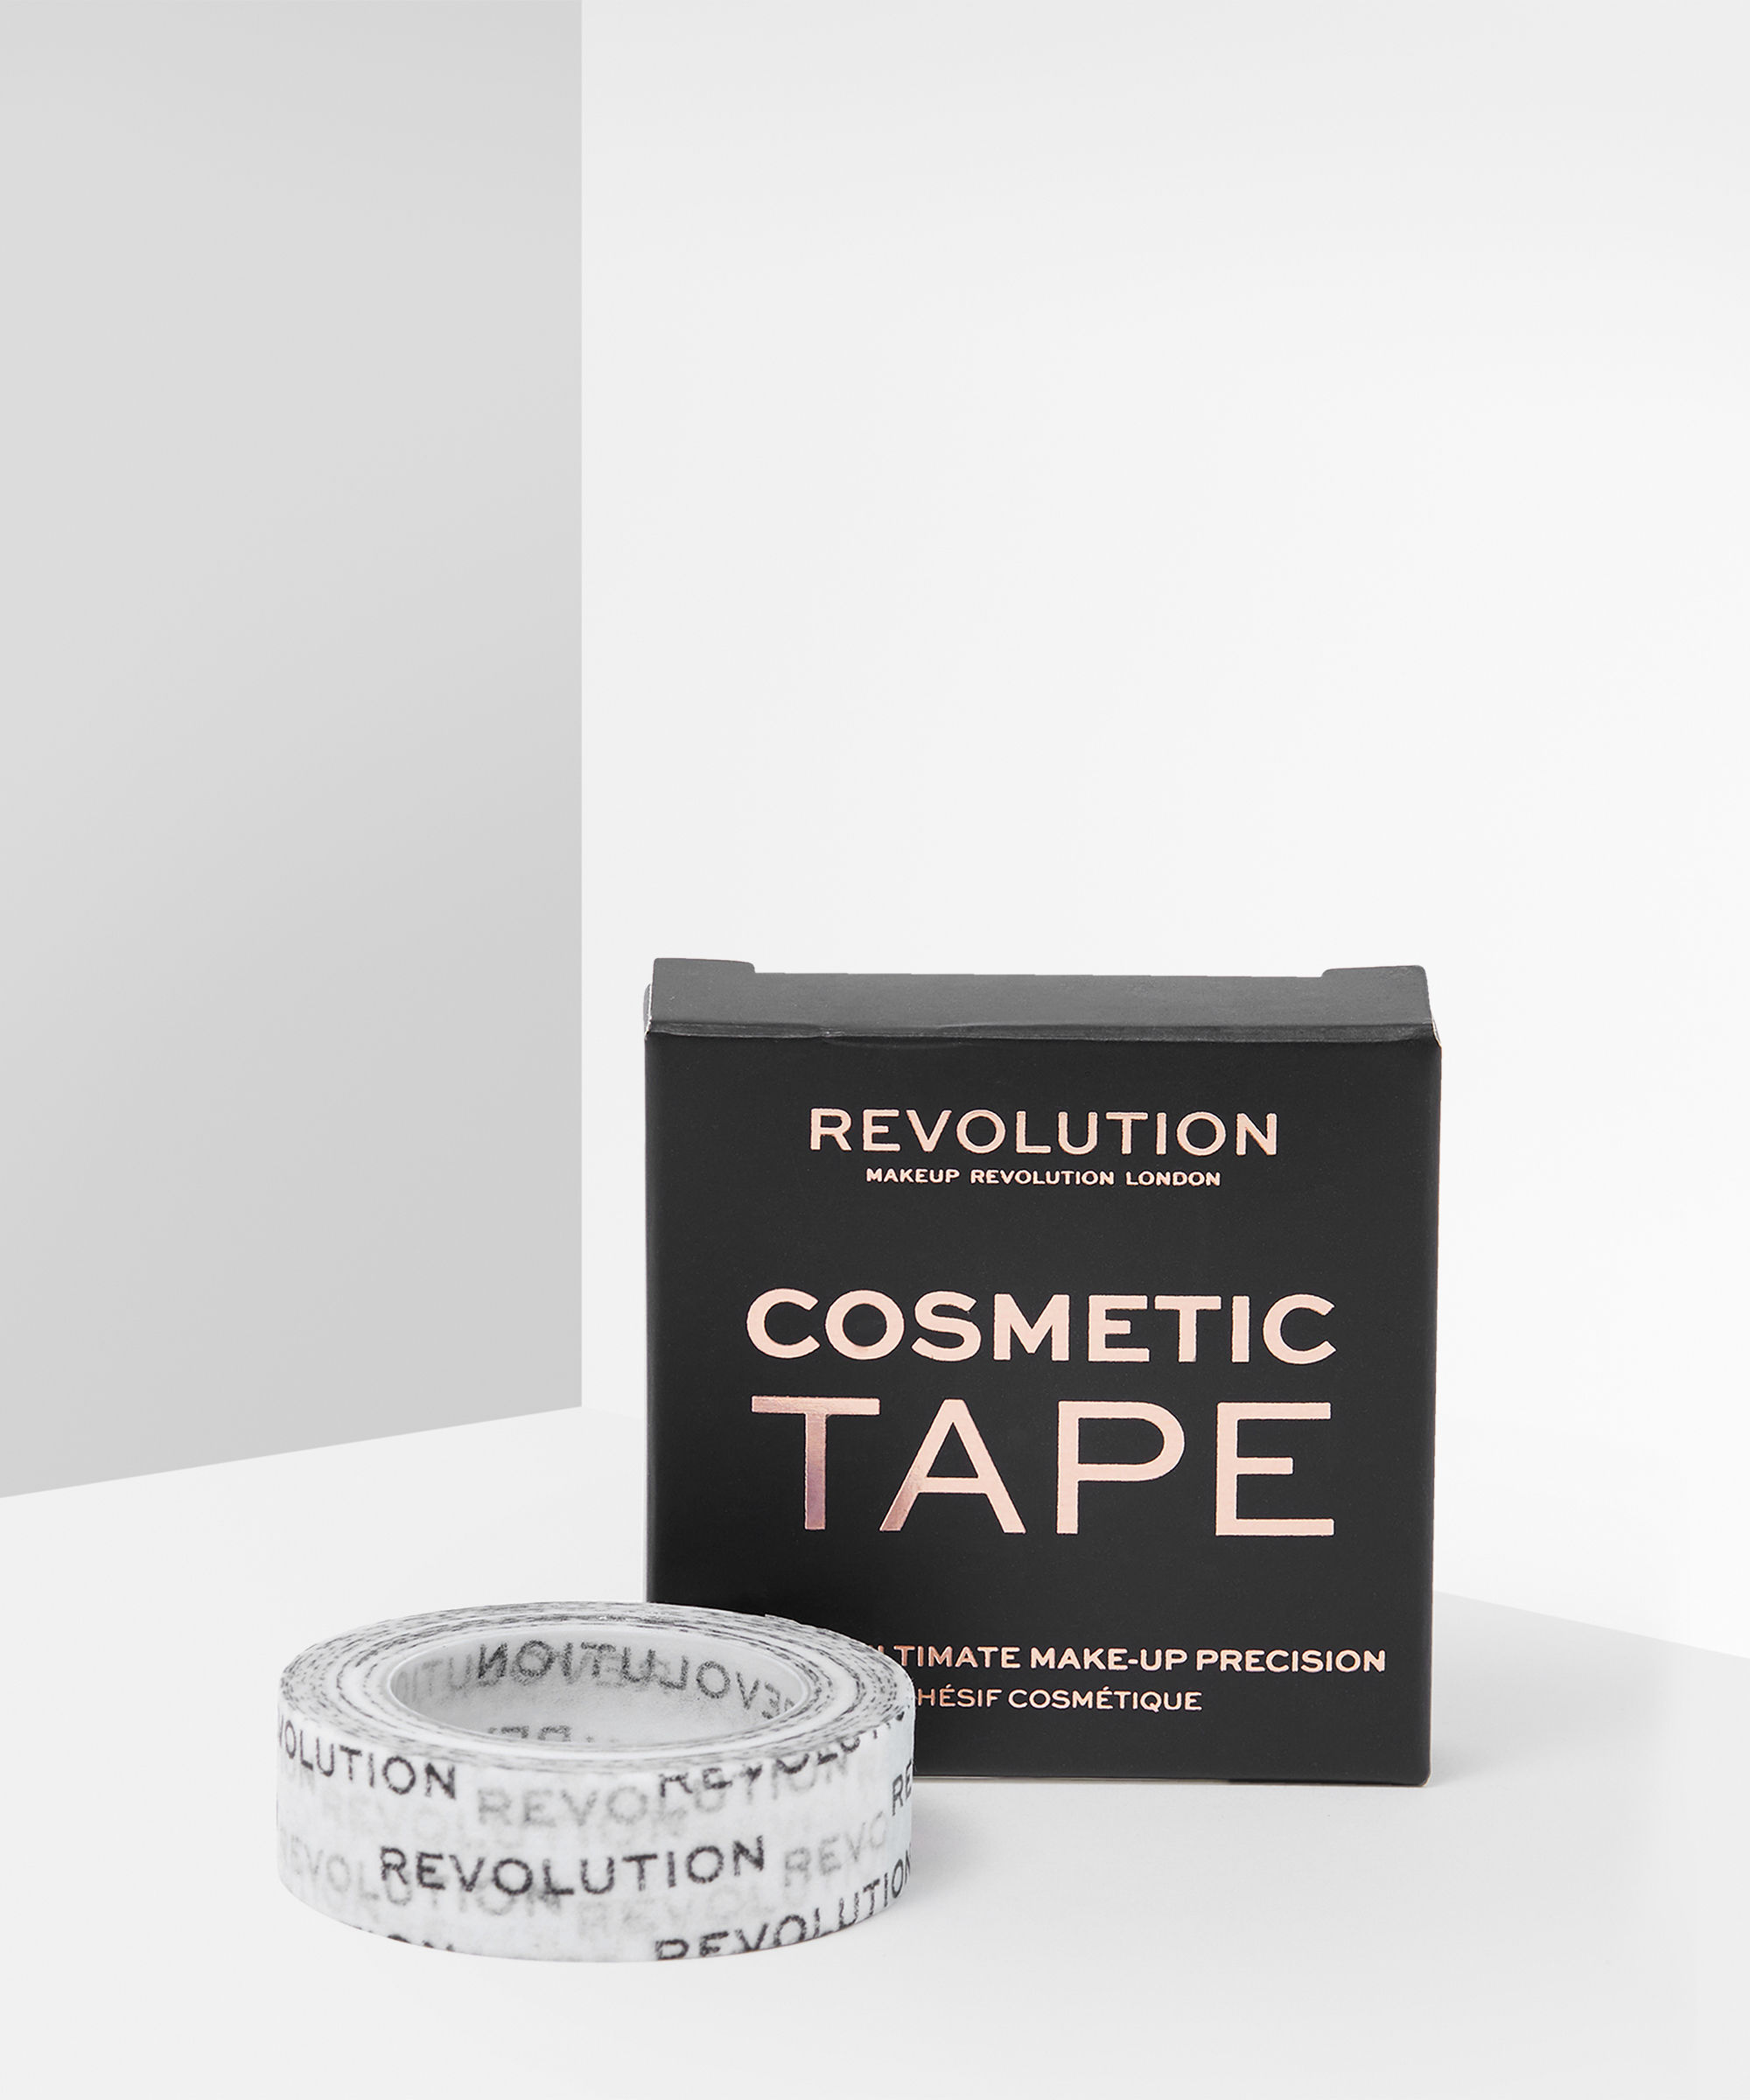 Makeup Revolution Cosmetic Tape at BEAUTY BAY